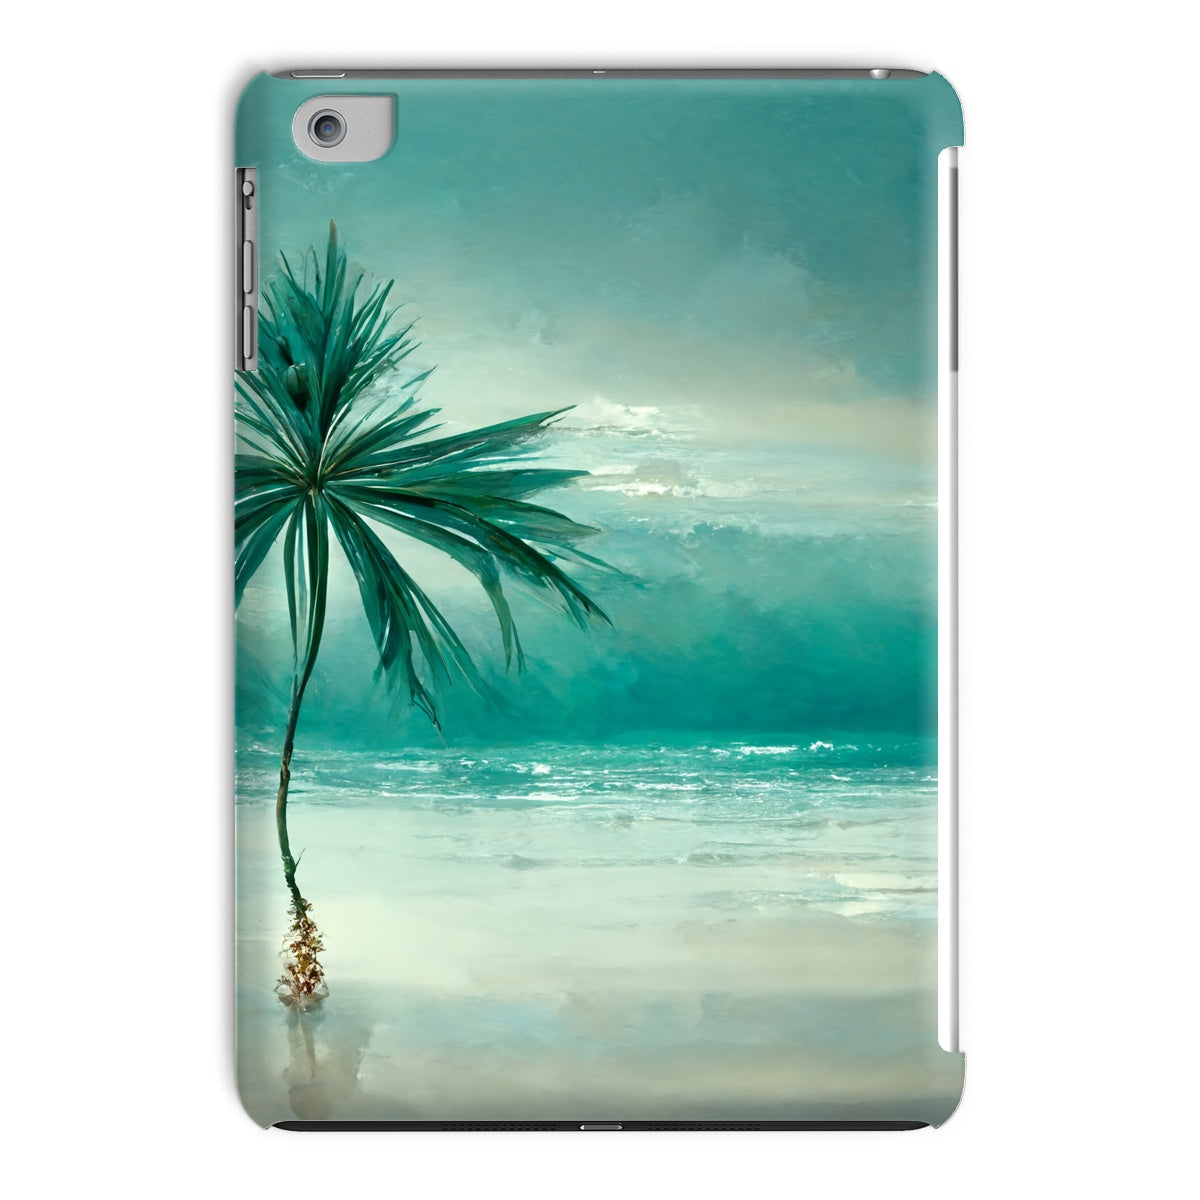 Lonesome Palm Tablet Cases